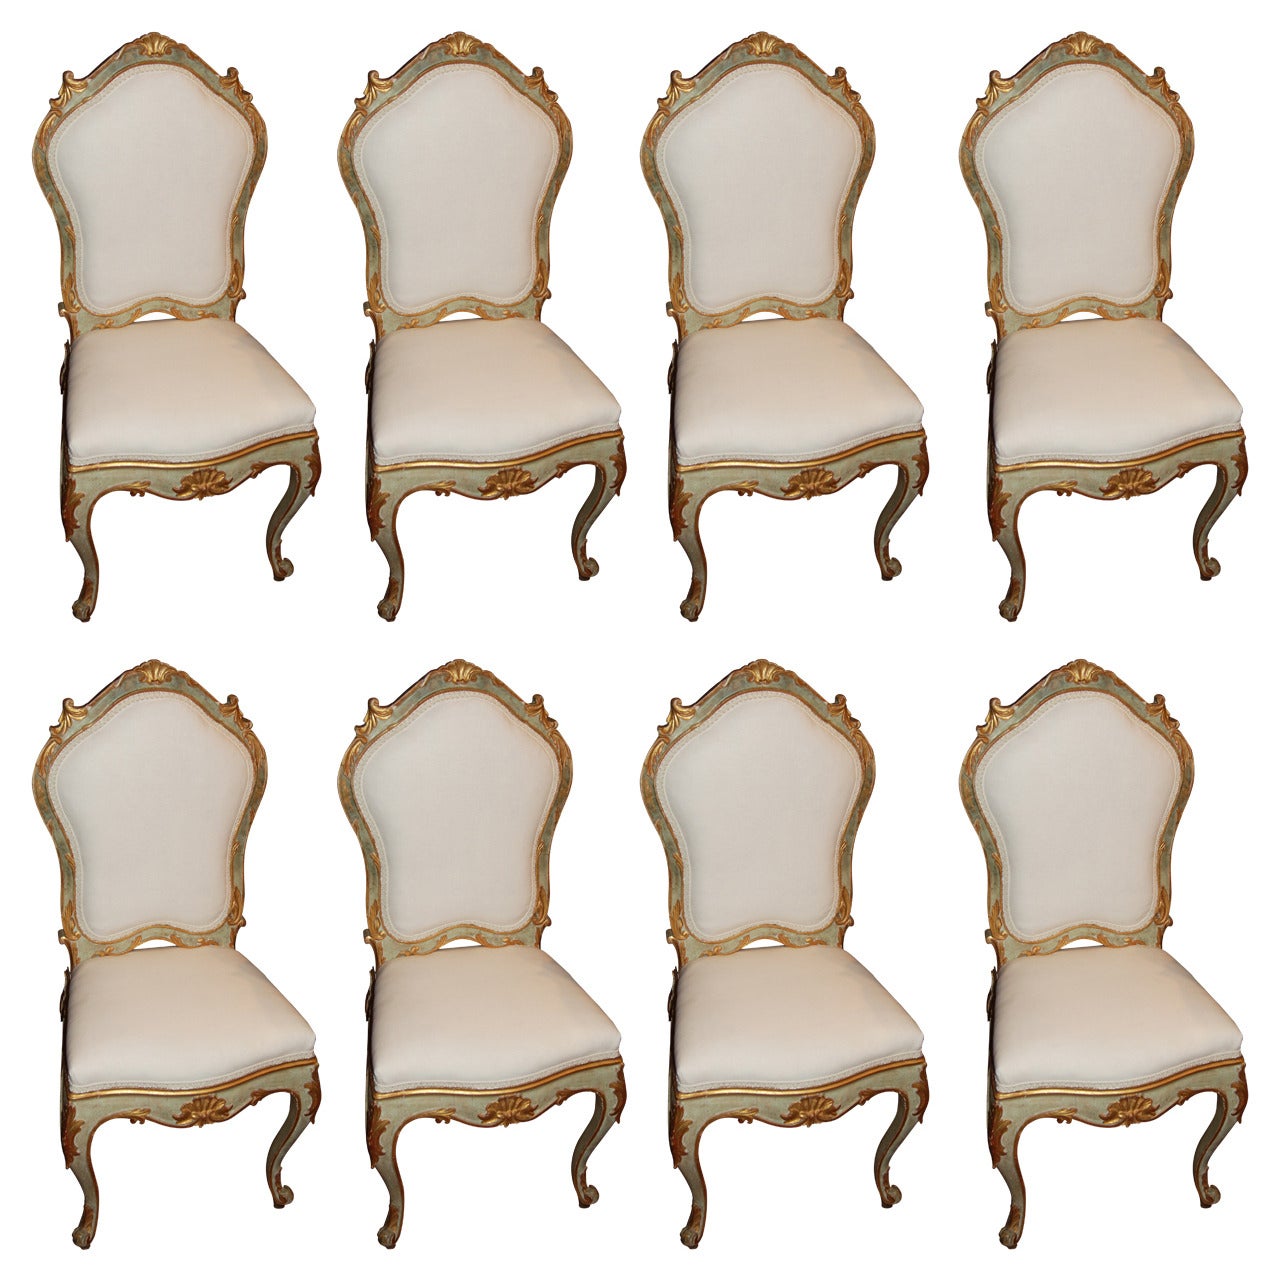 Set of 8 19thc. Ventian Chairs